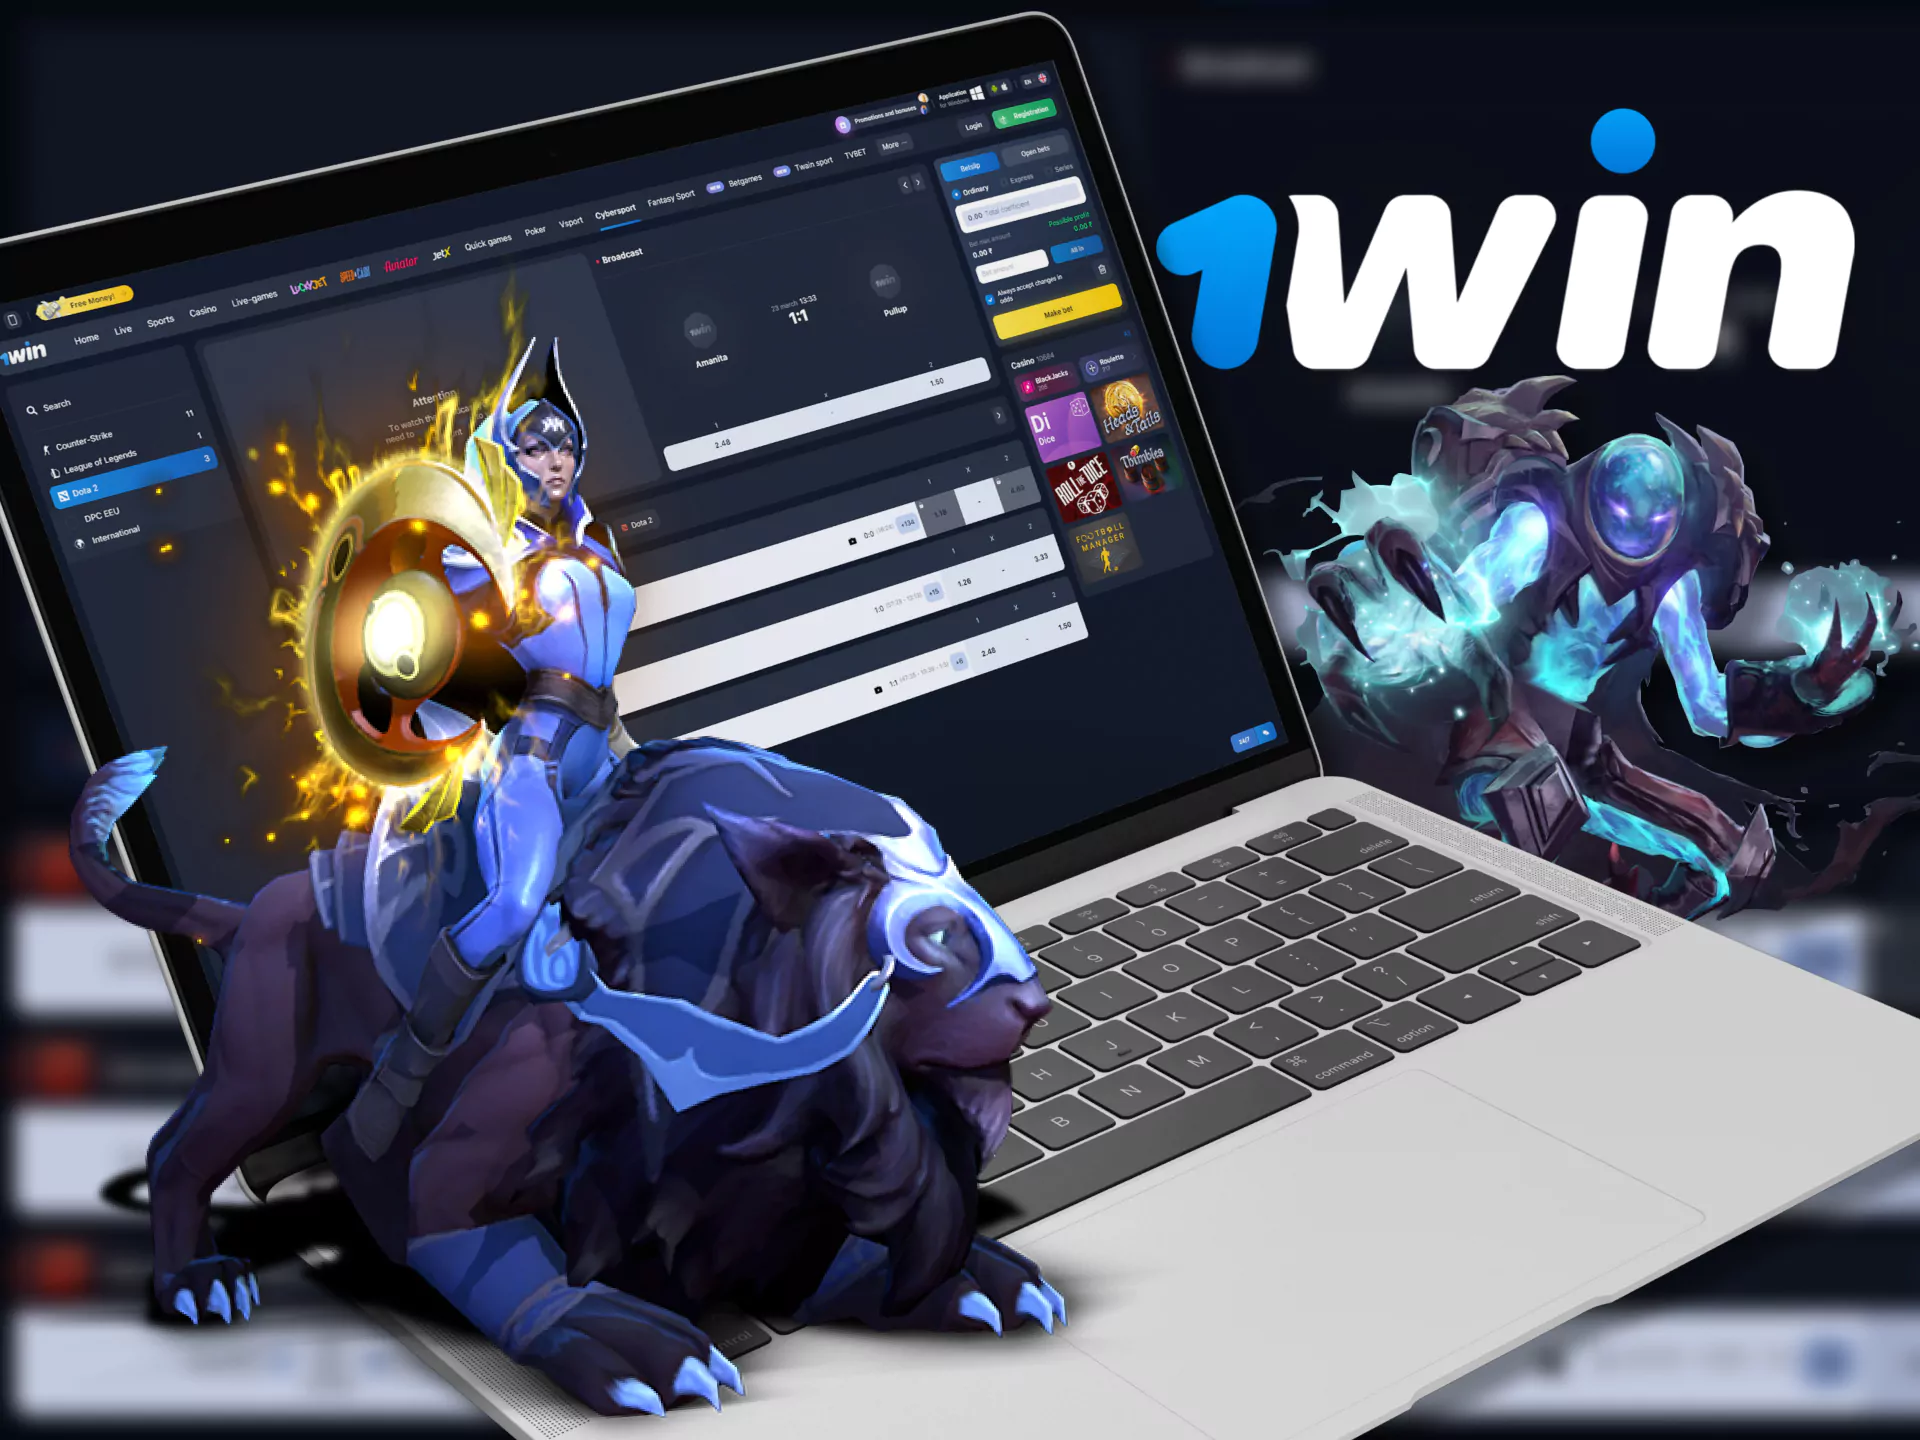 At 1Win, bet on important DOTA 2 tournaments.